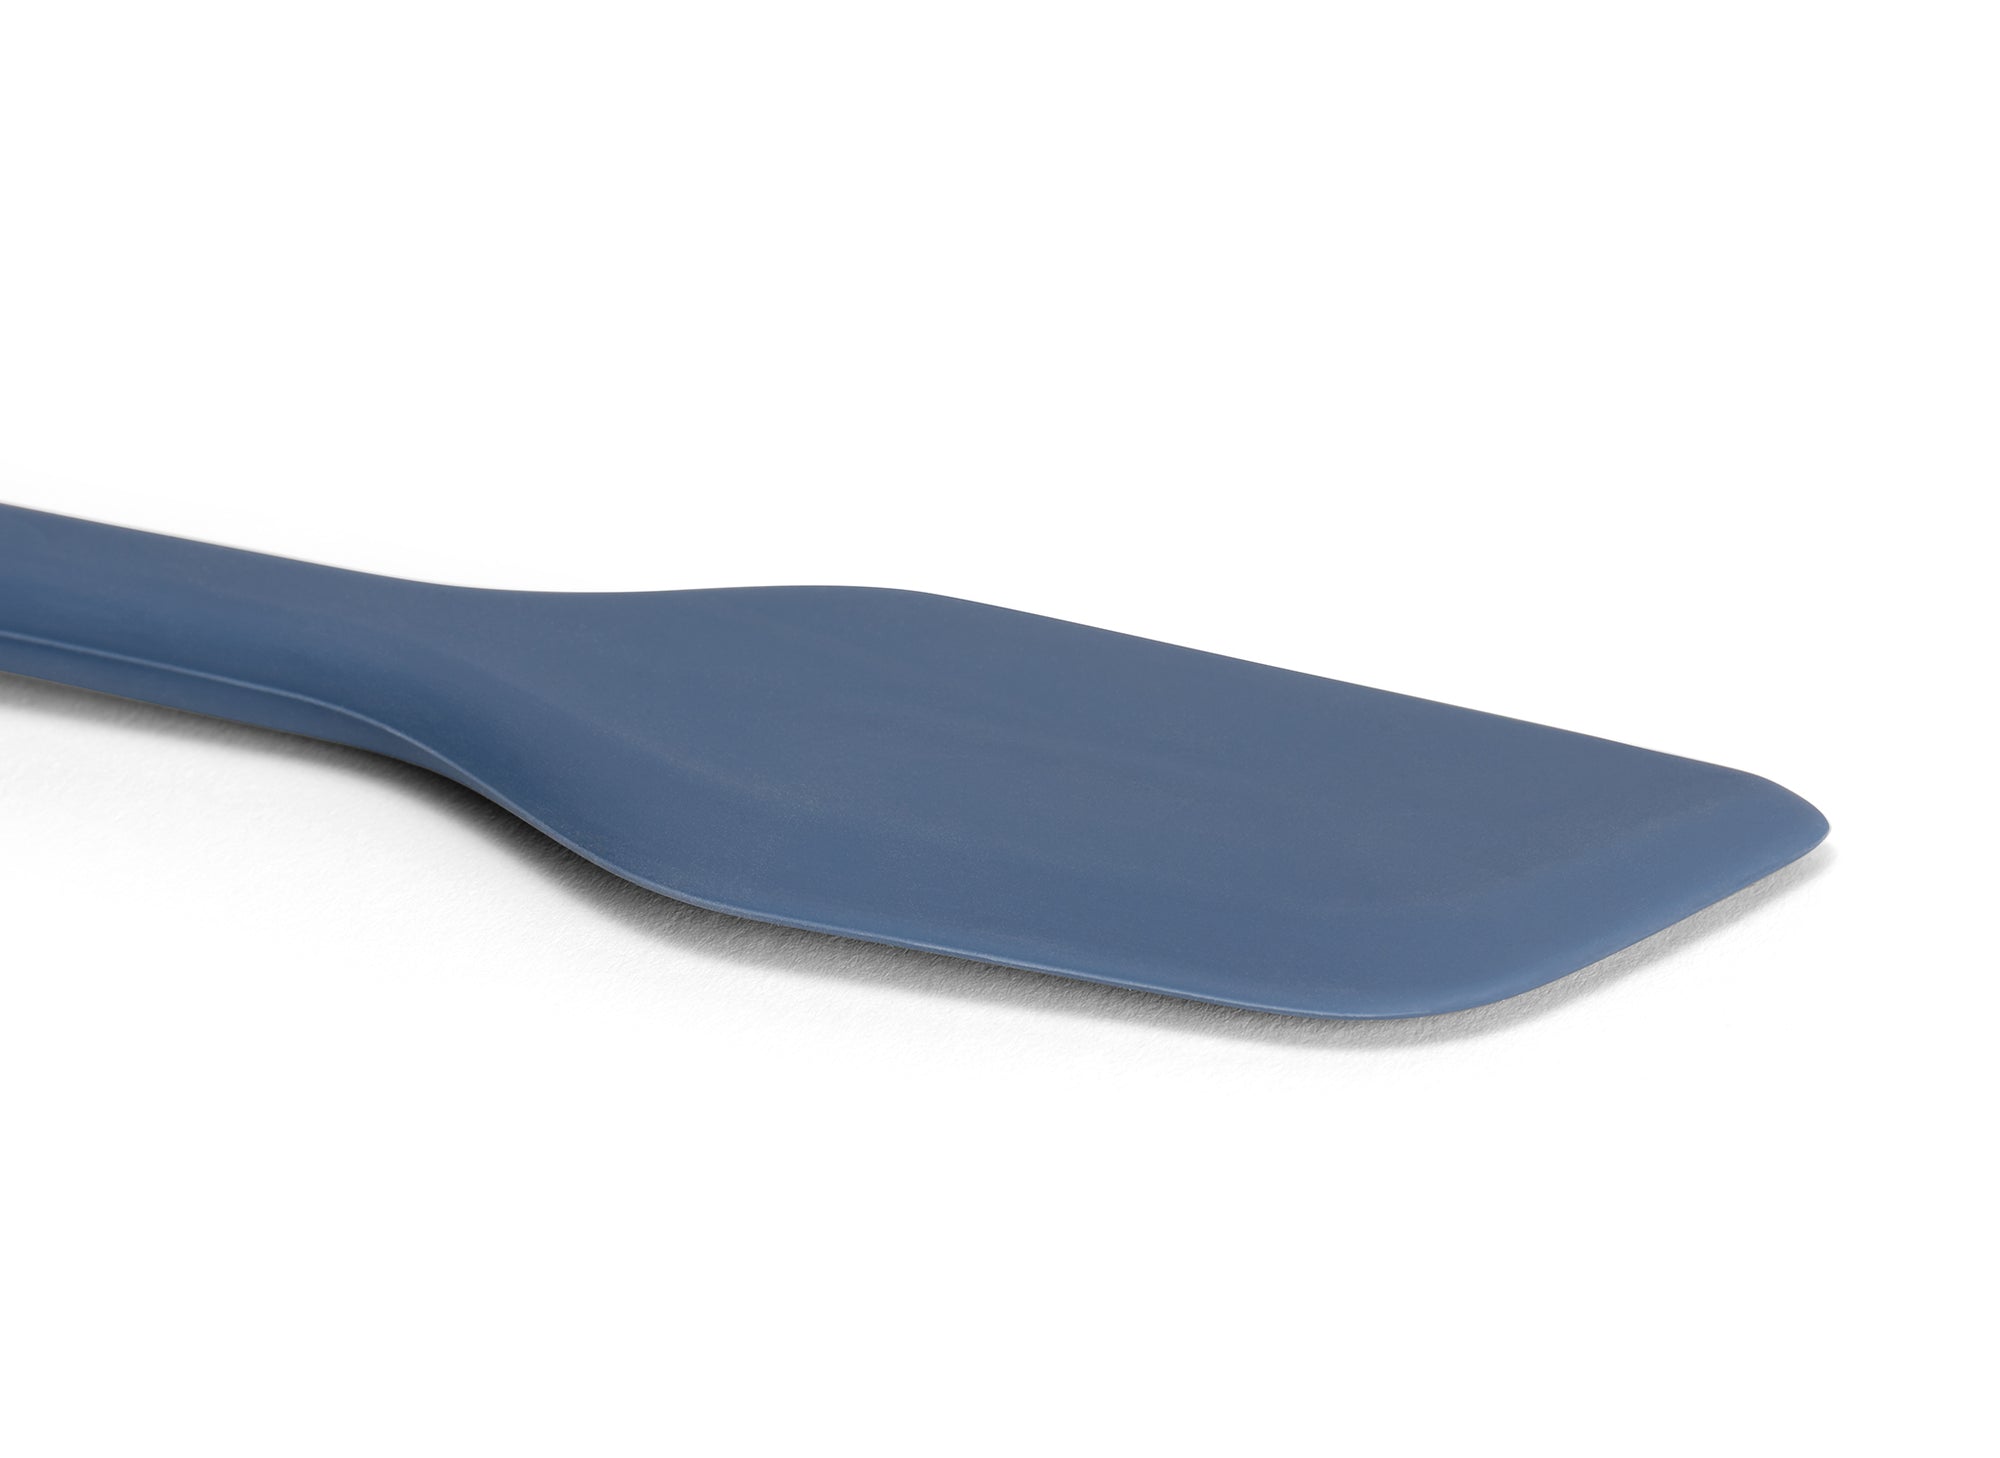 A close view of the Blue Misen Mixing Spatula’s silicone head on a white background.